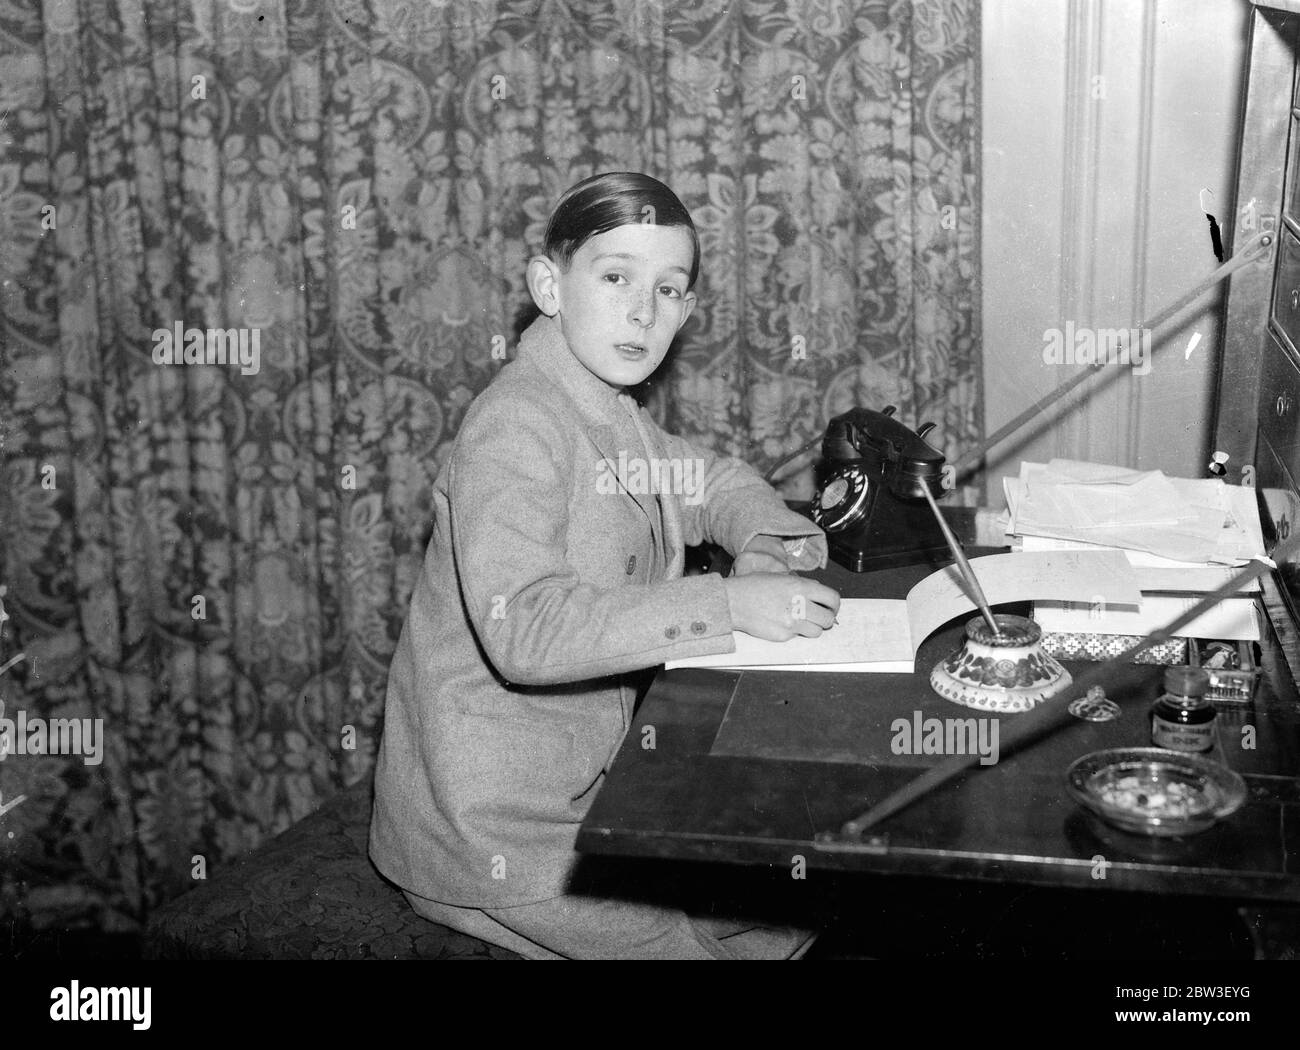 Writing his third book at 11 years of age . London boy with  astonishing gift  bought typewriter with royalties . Robert Holland at work on his new book with his typewriter . 21 December 1935 Stock Photo